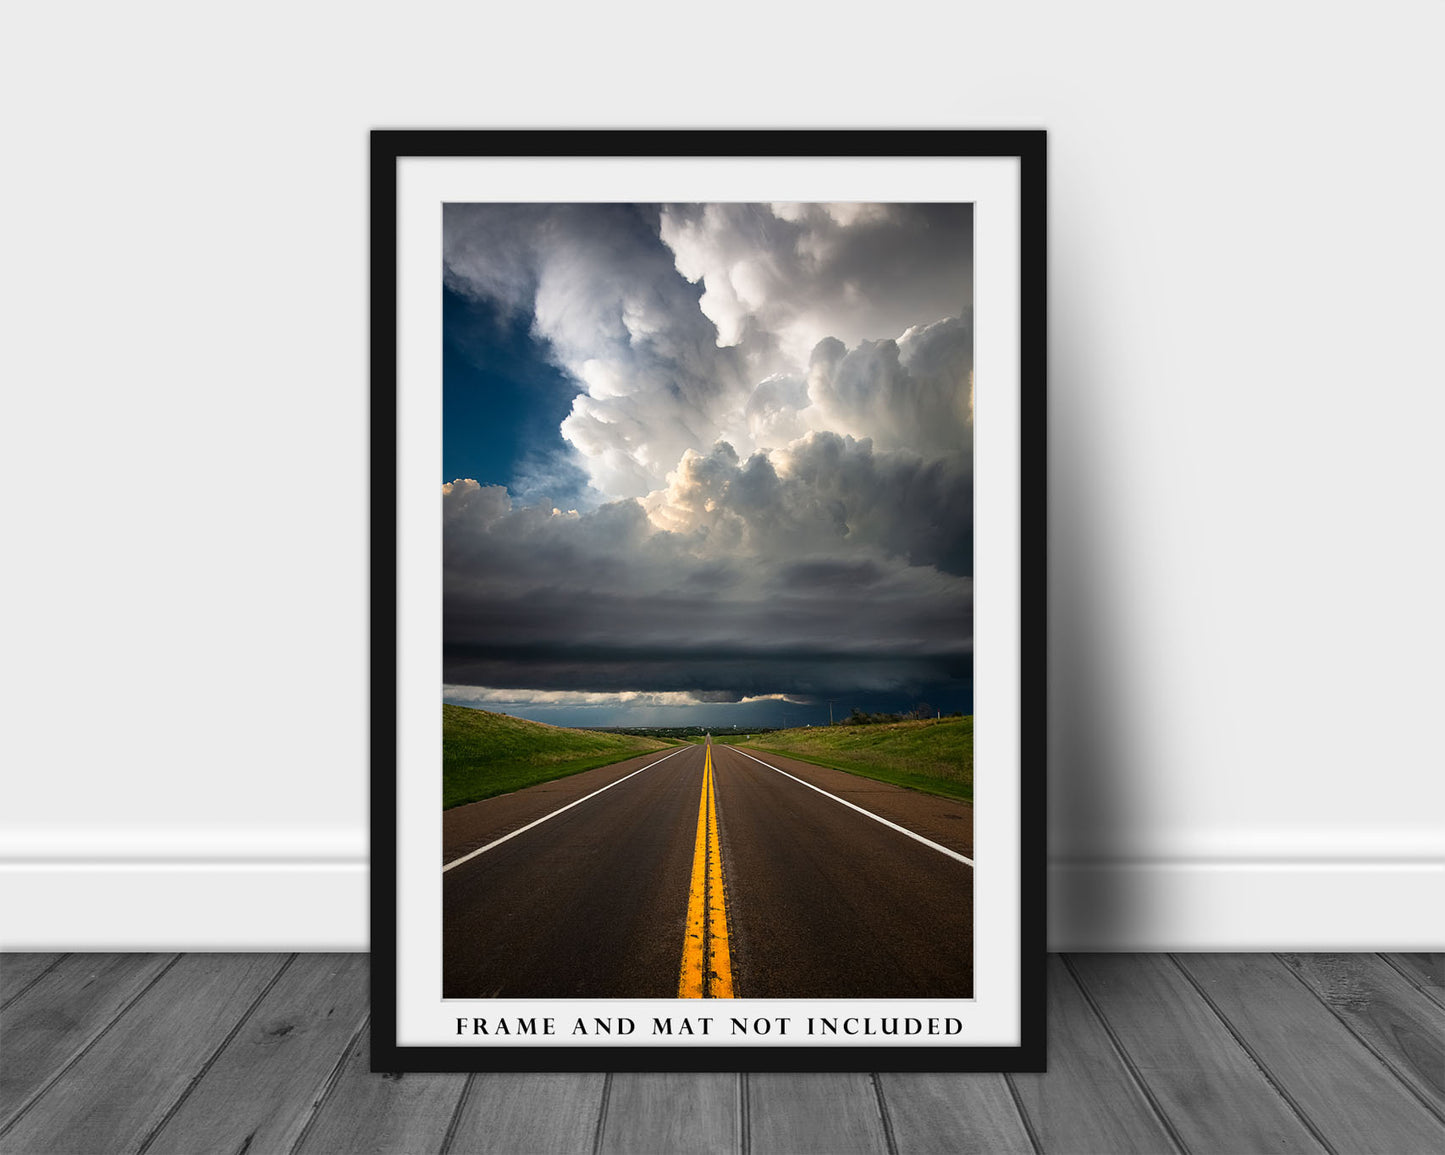 Storm Photo Print | Supercell Thunderstorm Over Highway Picture | Kansas Wall Art | Weather Photography | Wanderlust Decor